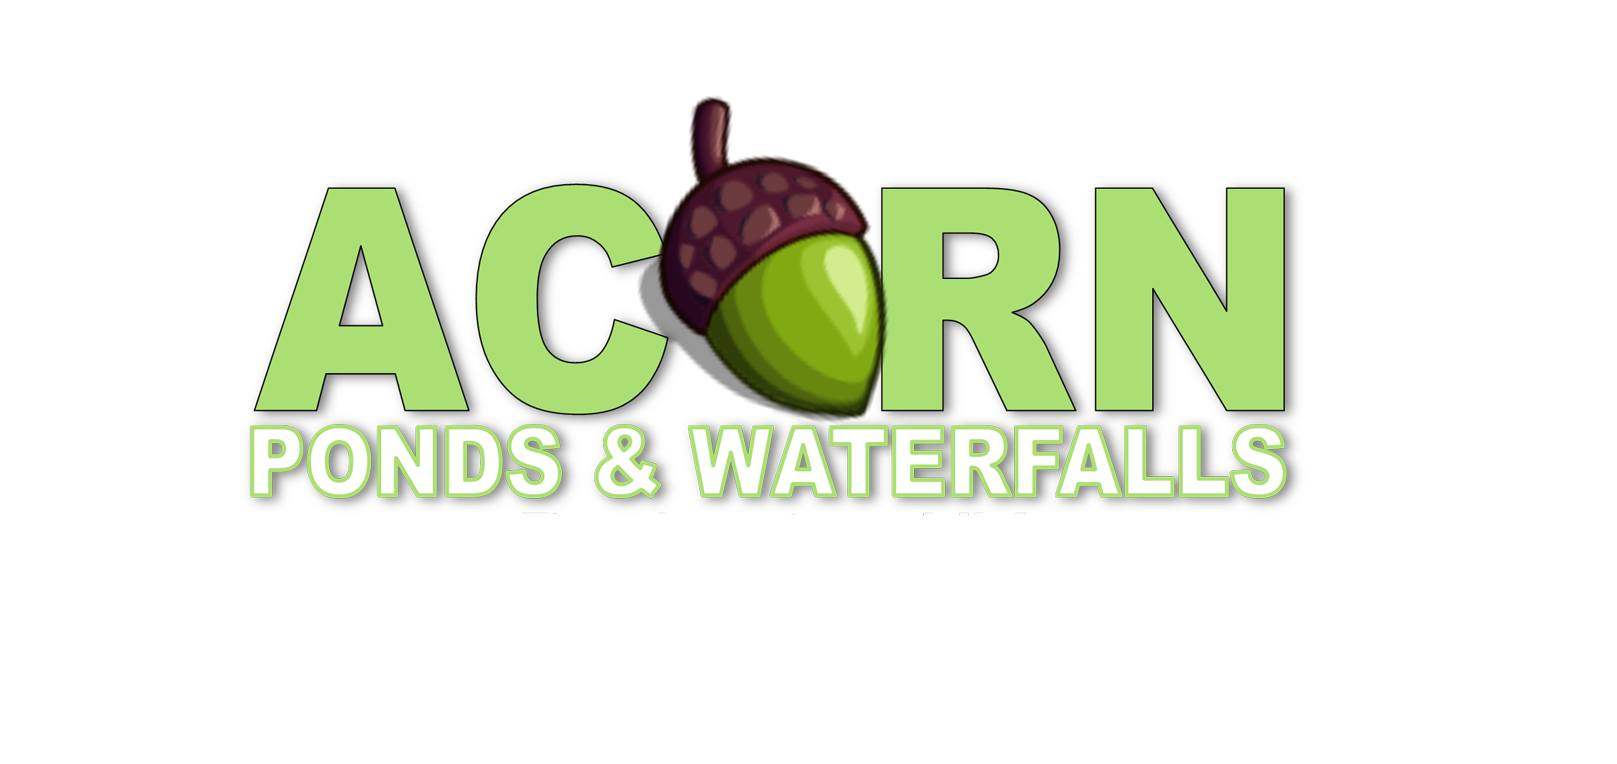  Pond & Water Garden Liner Repair And Replacement Services - Acorn Ponds & Waterfalls